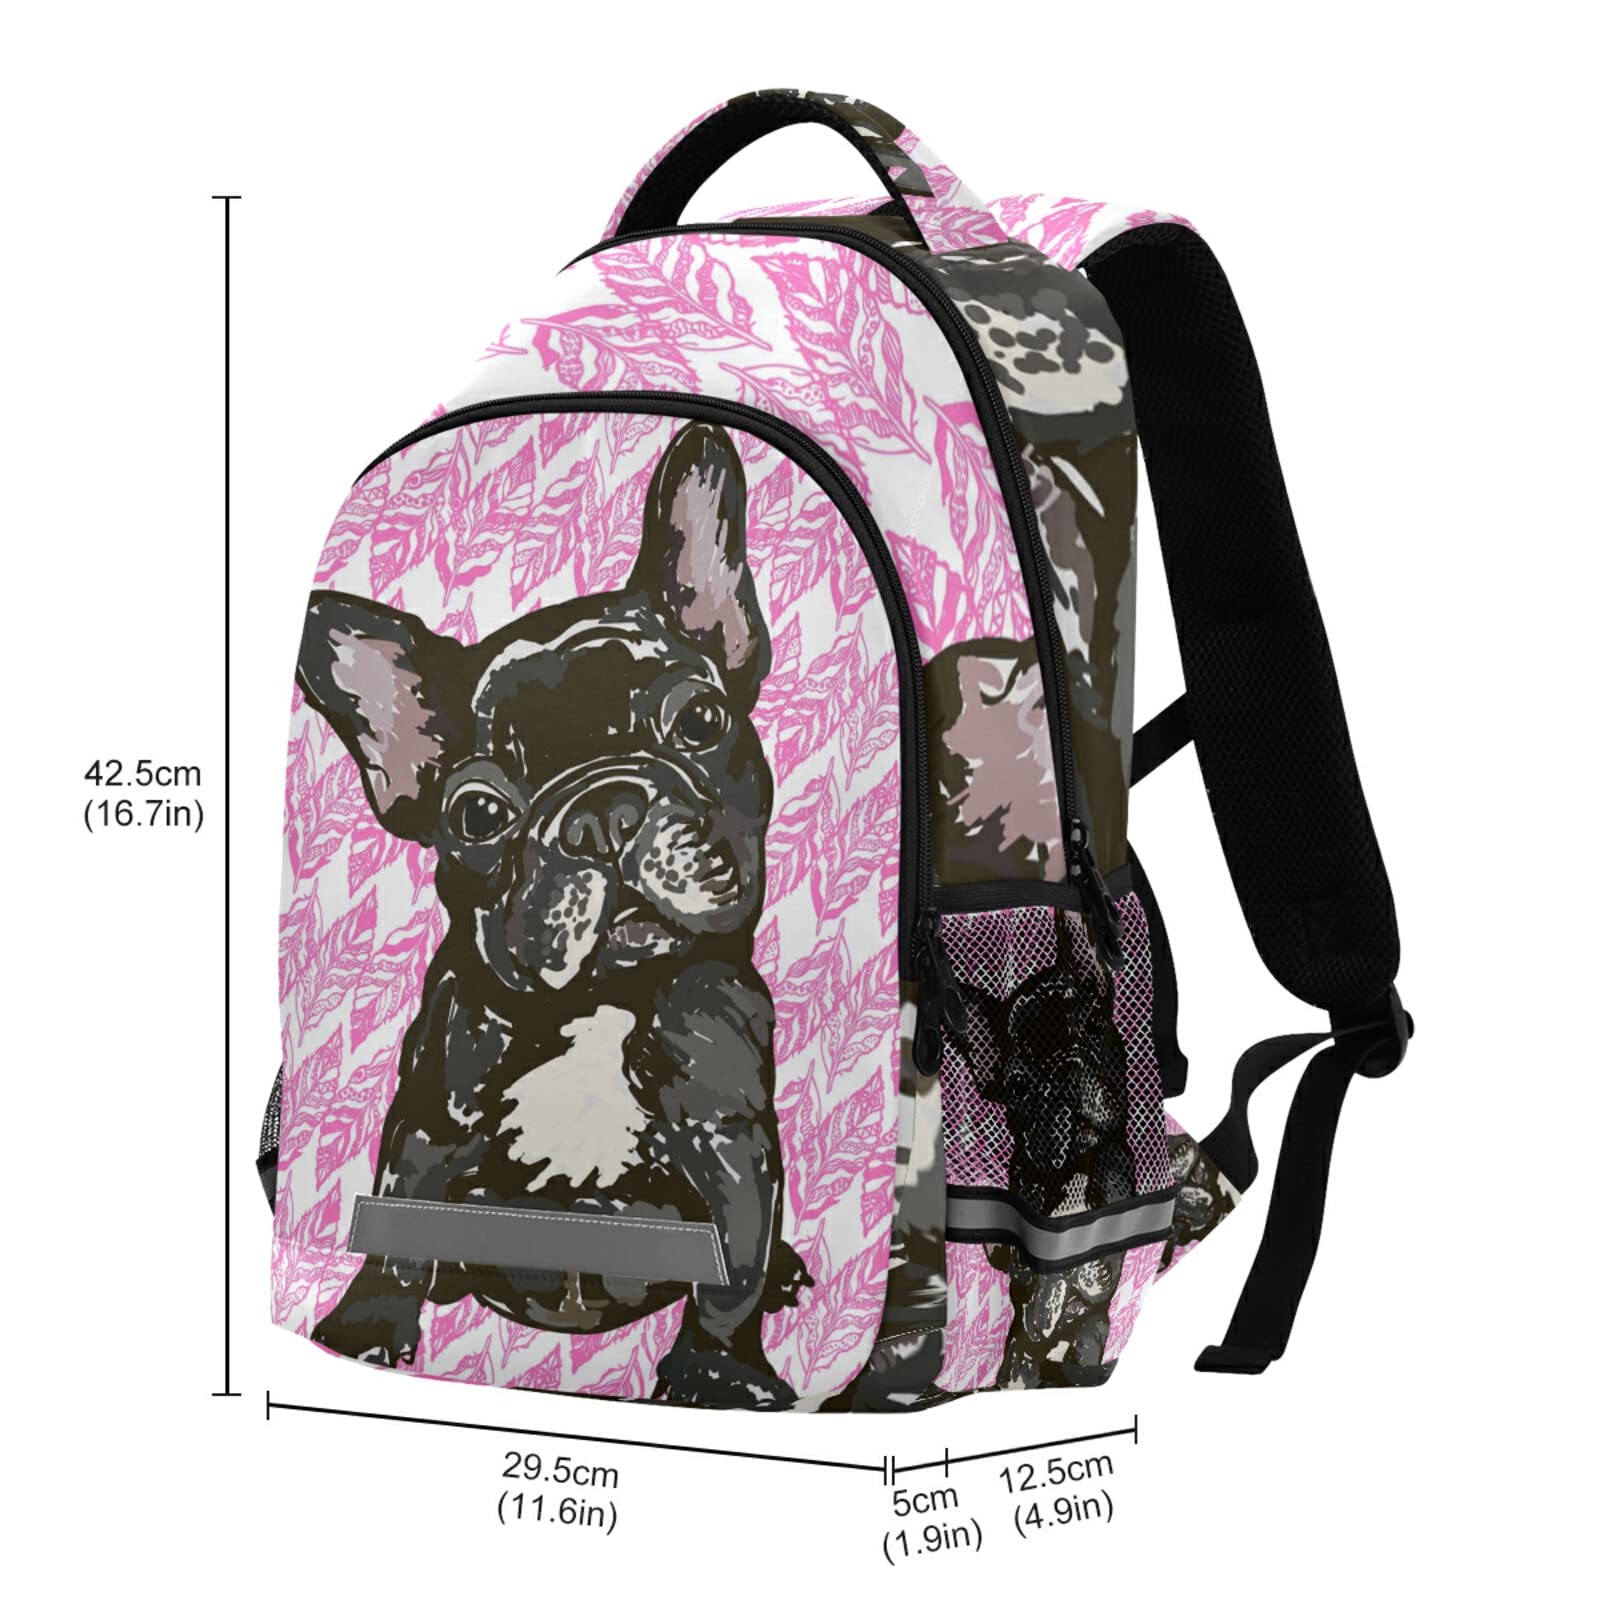 ALAZA Puppy French Bulldog Backpacks Travel Laptop Daypack School Book Bag for Men Women Teens Kids one-size